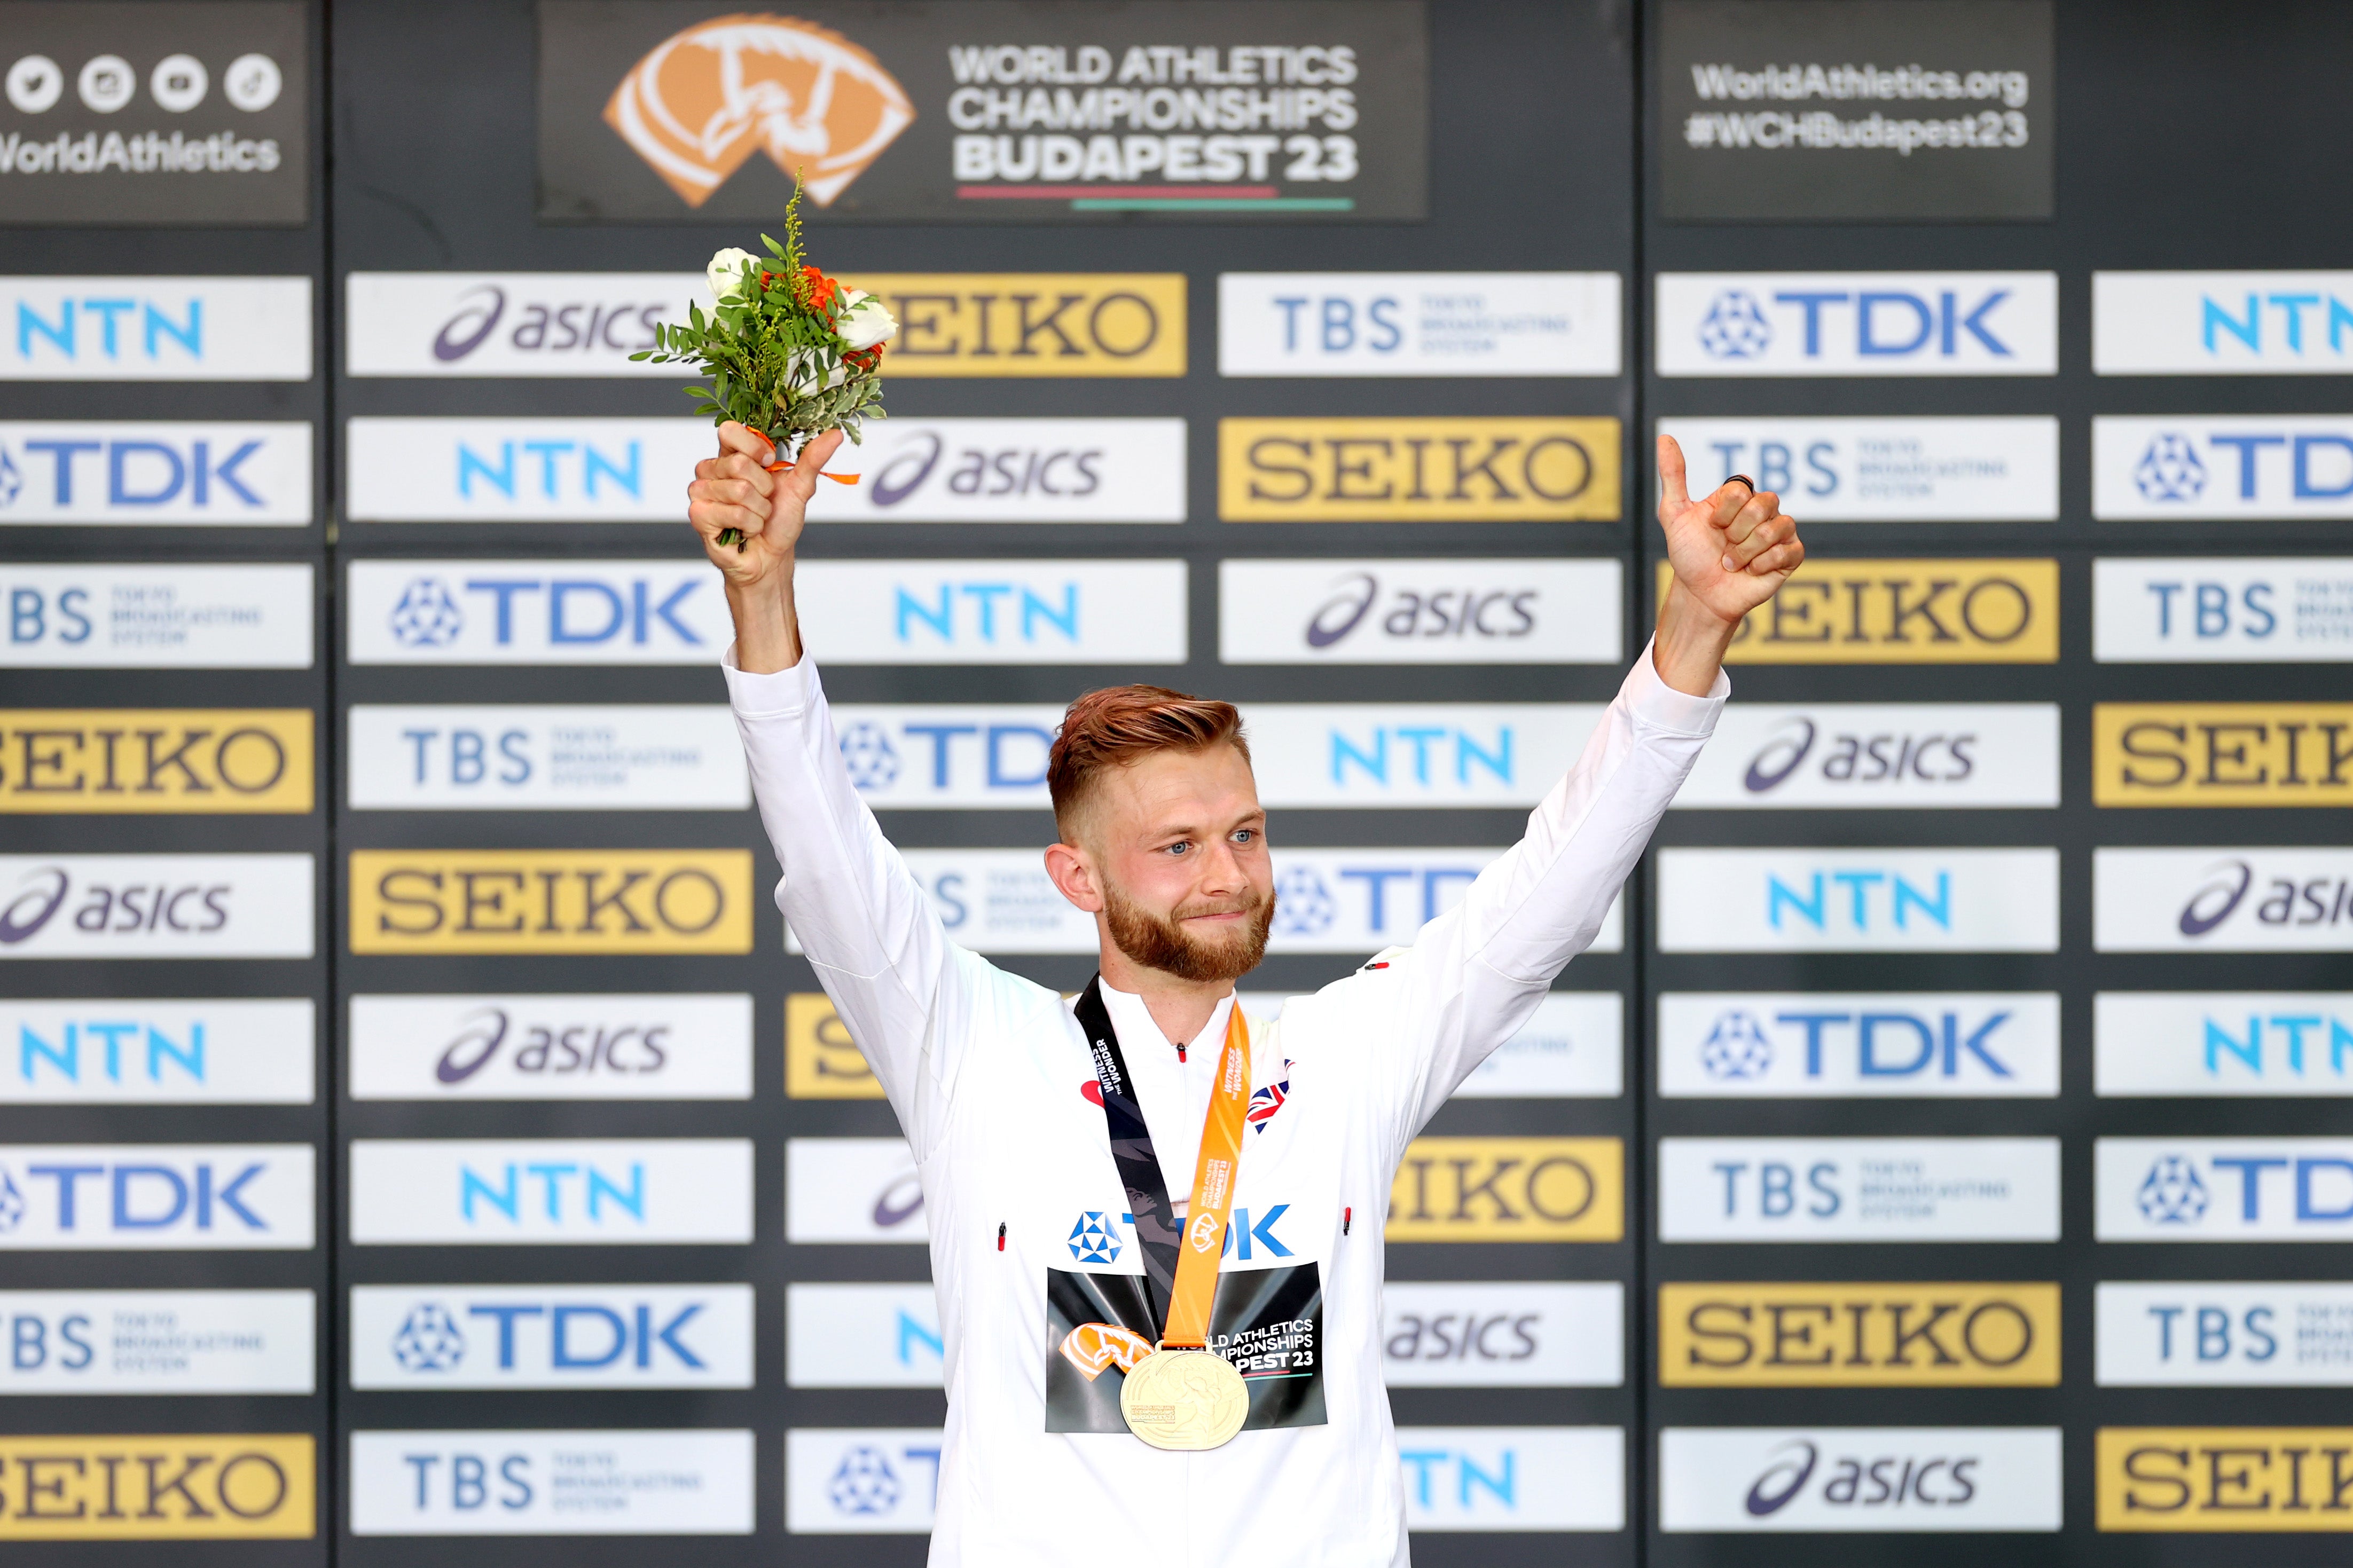 Kerr celebrates becoming a world champion in Budapest